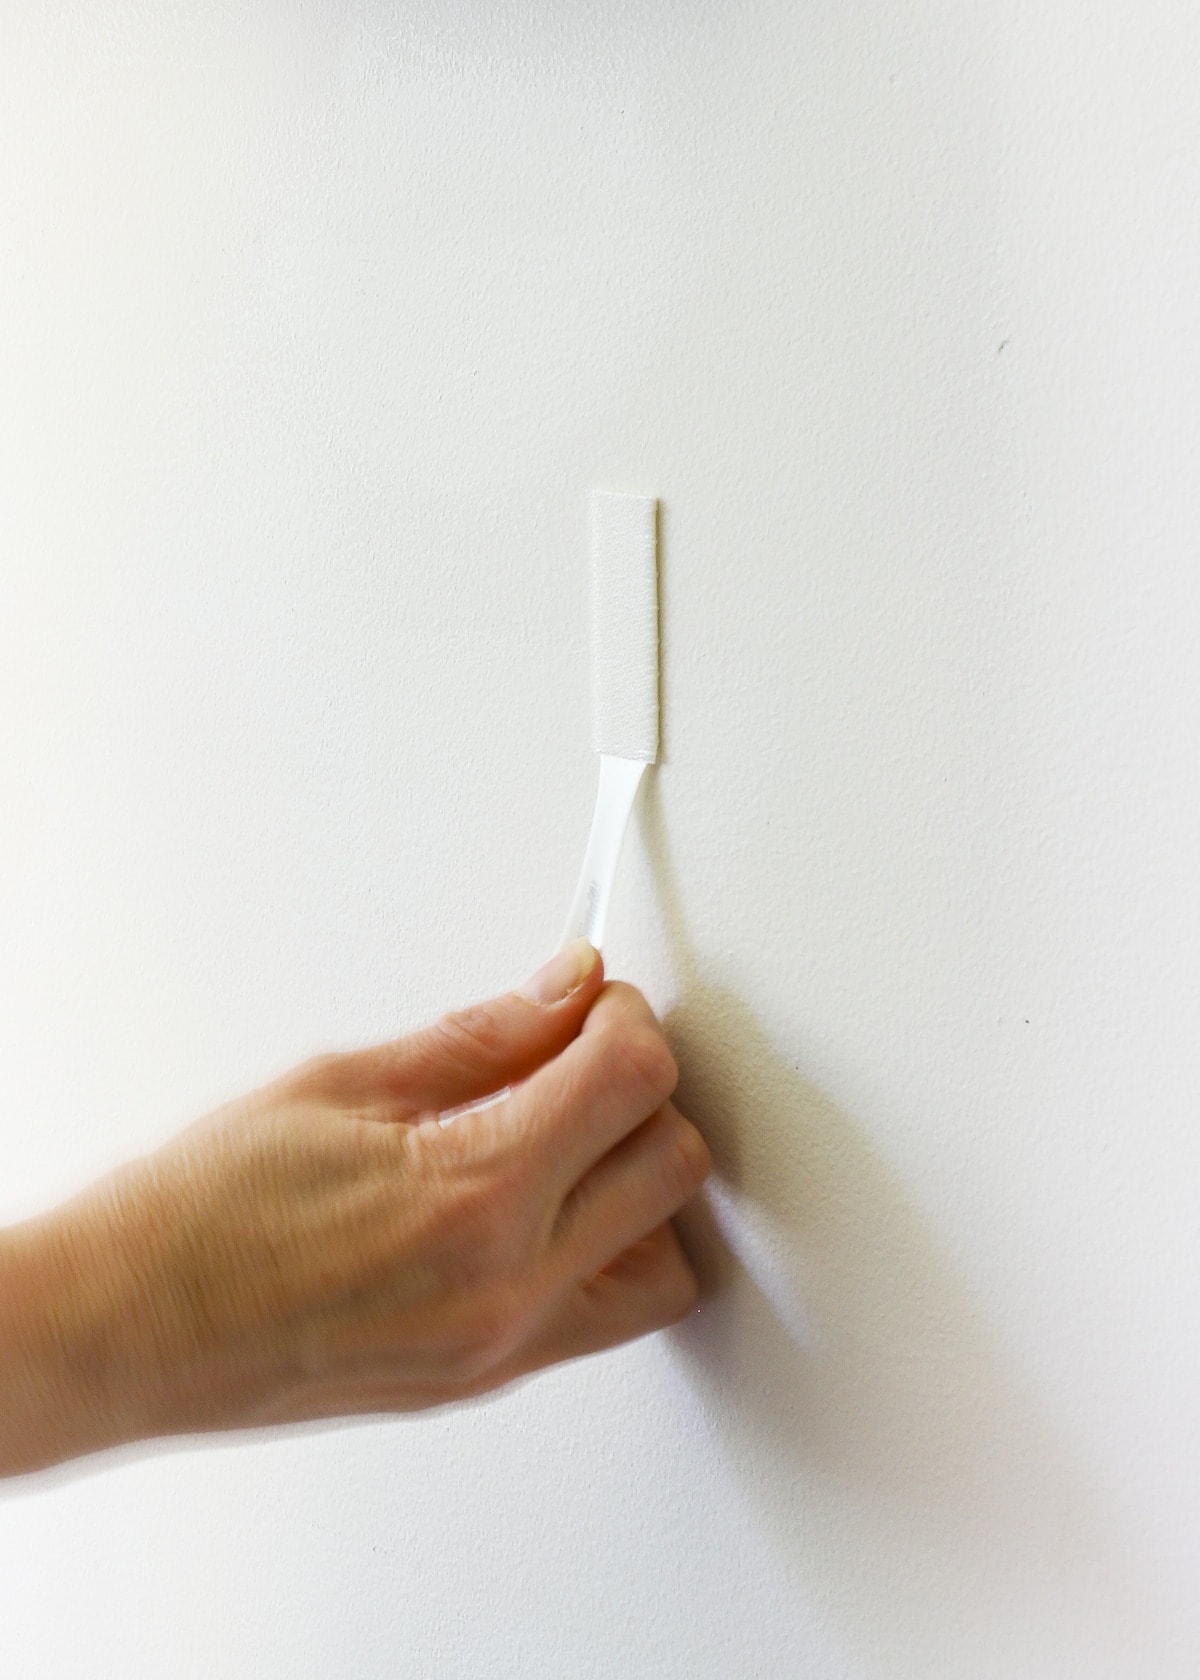 How To Remove The 3M Command Strips Without Damaging Your Wall 2020 